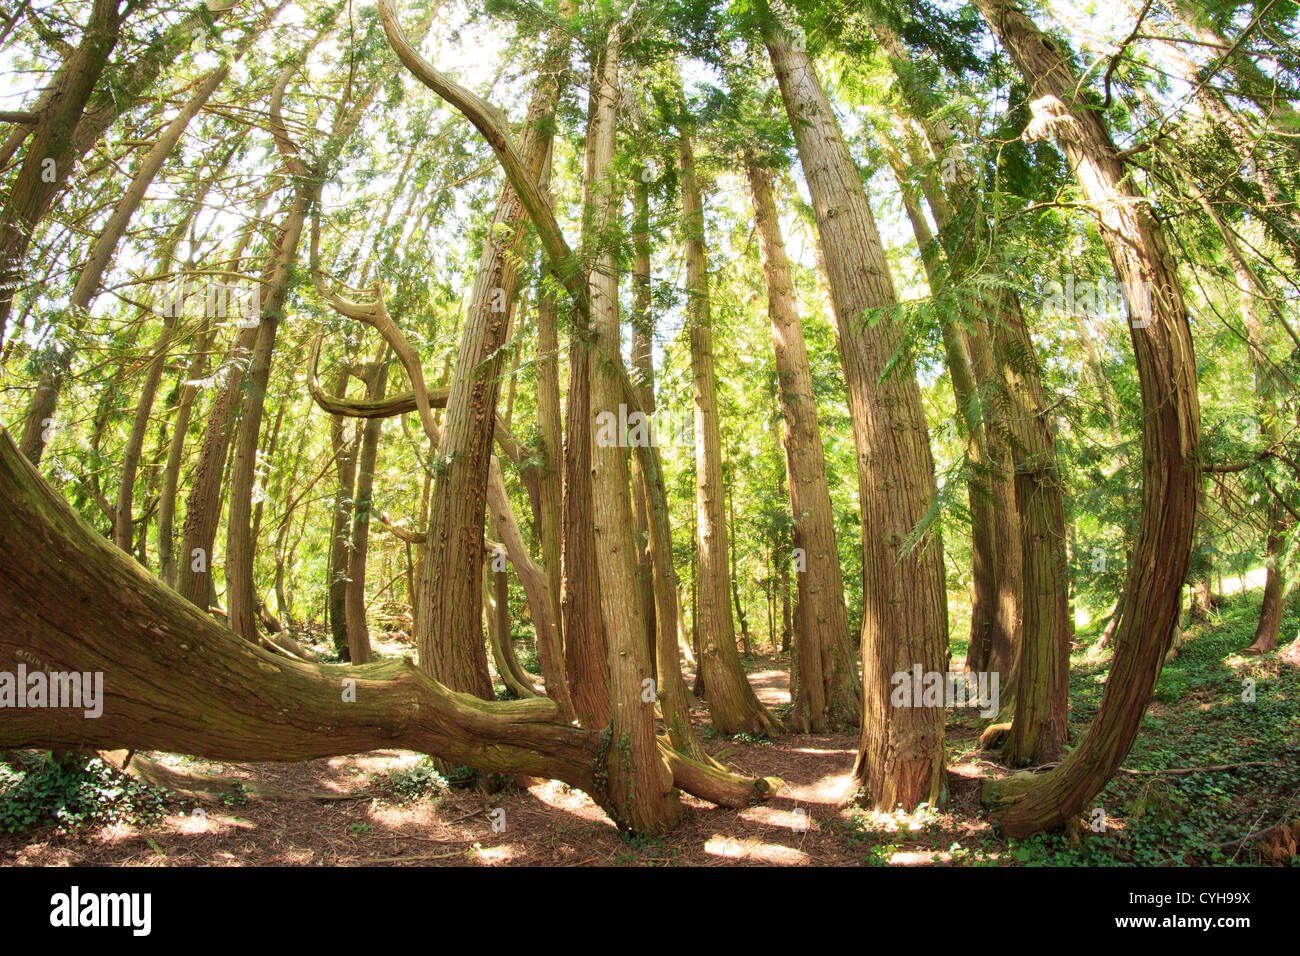 France, Arbofolia, old Thuja plicata or Western Redcedar with 80 trunks (extanding by natural marcottage) Stock Photo